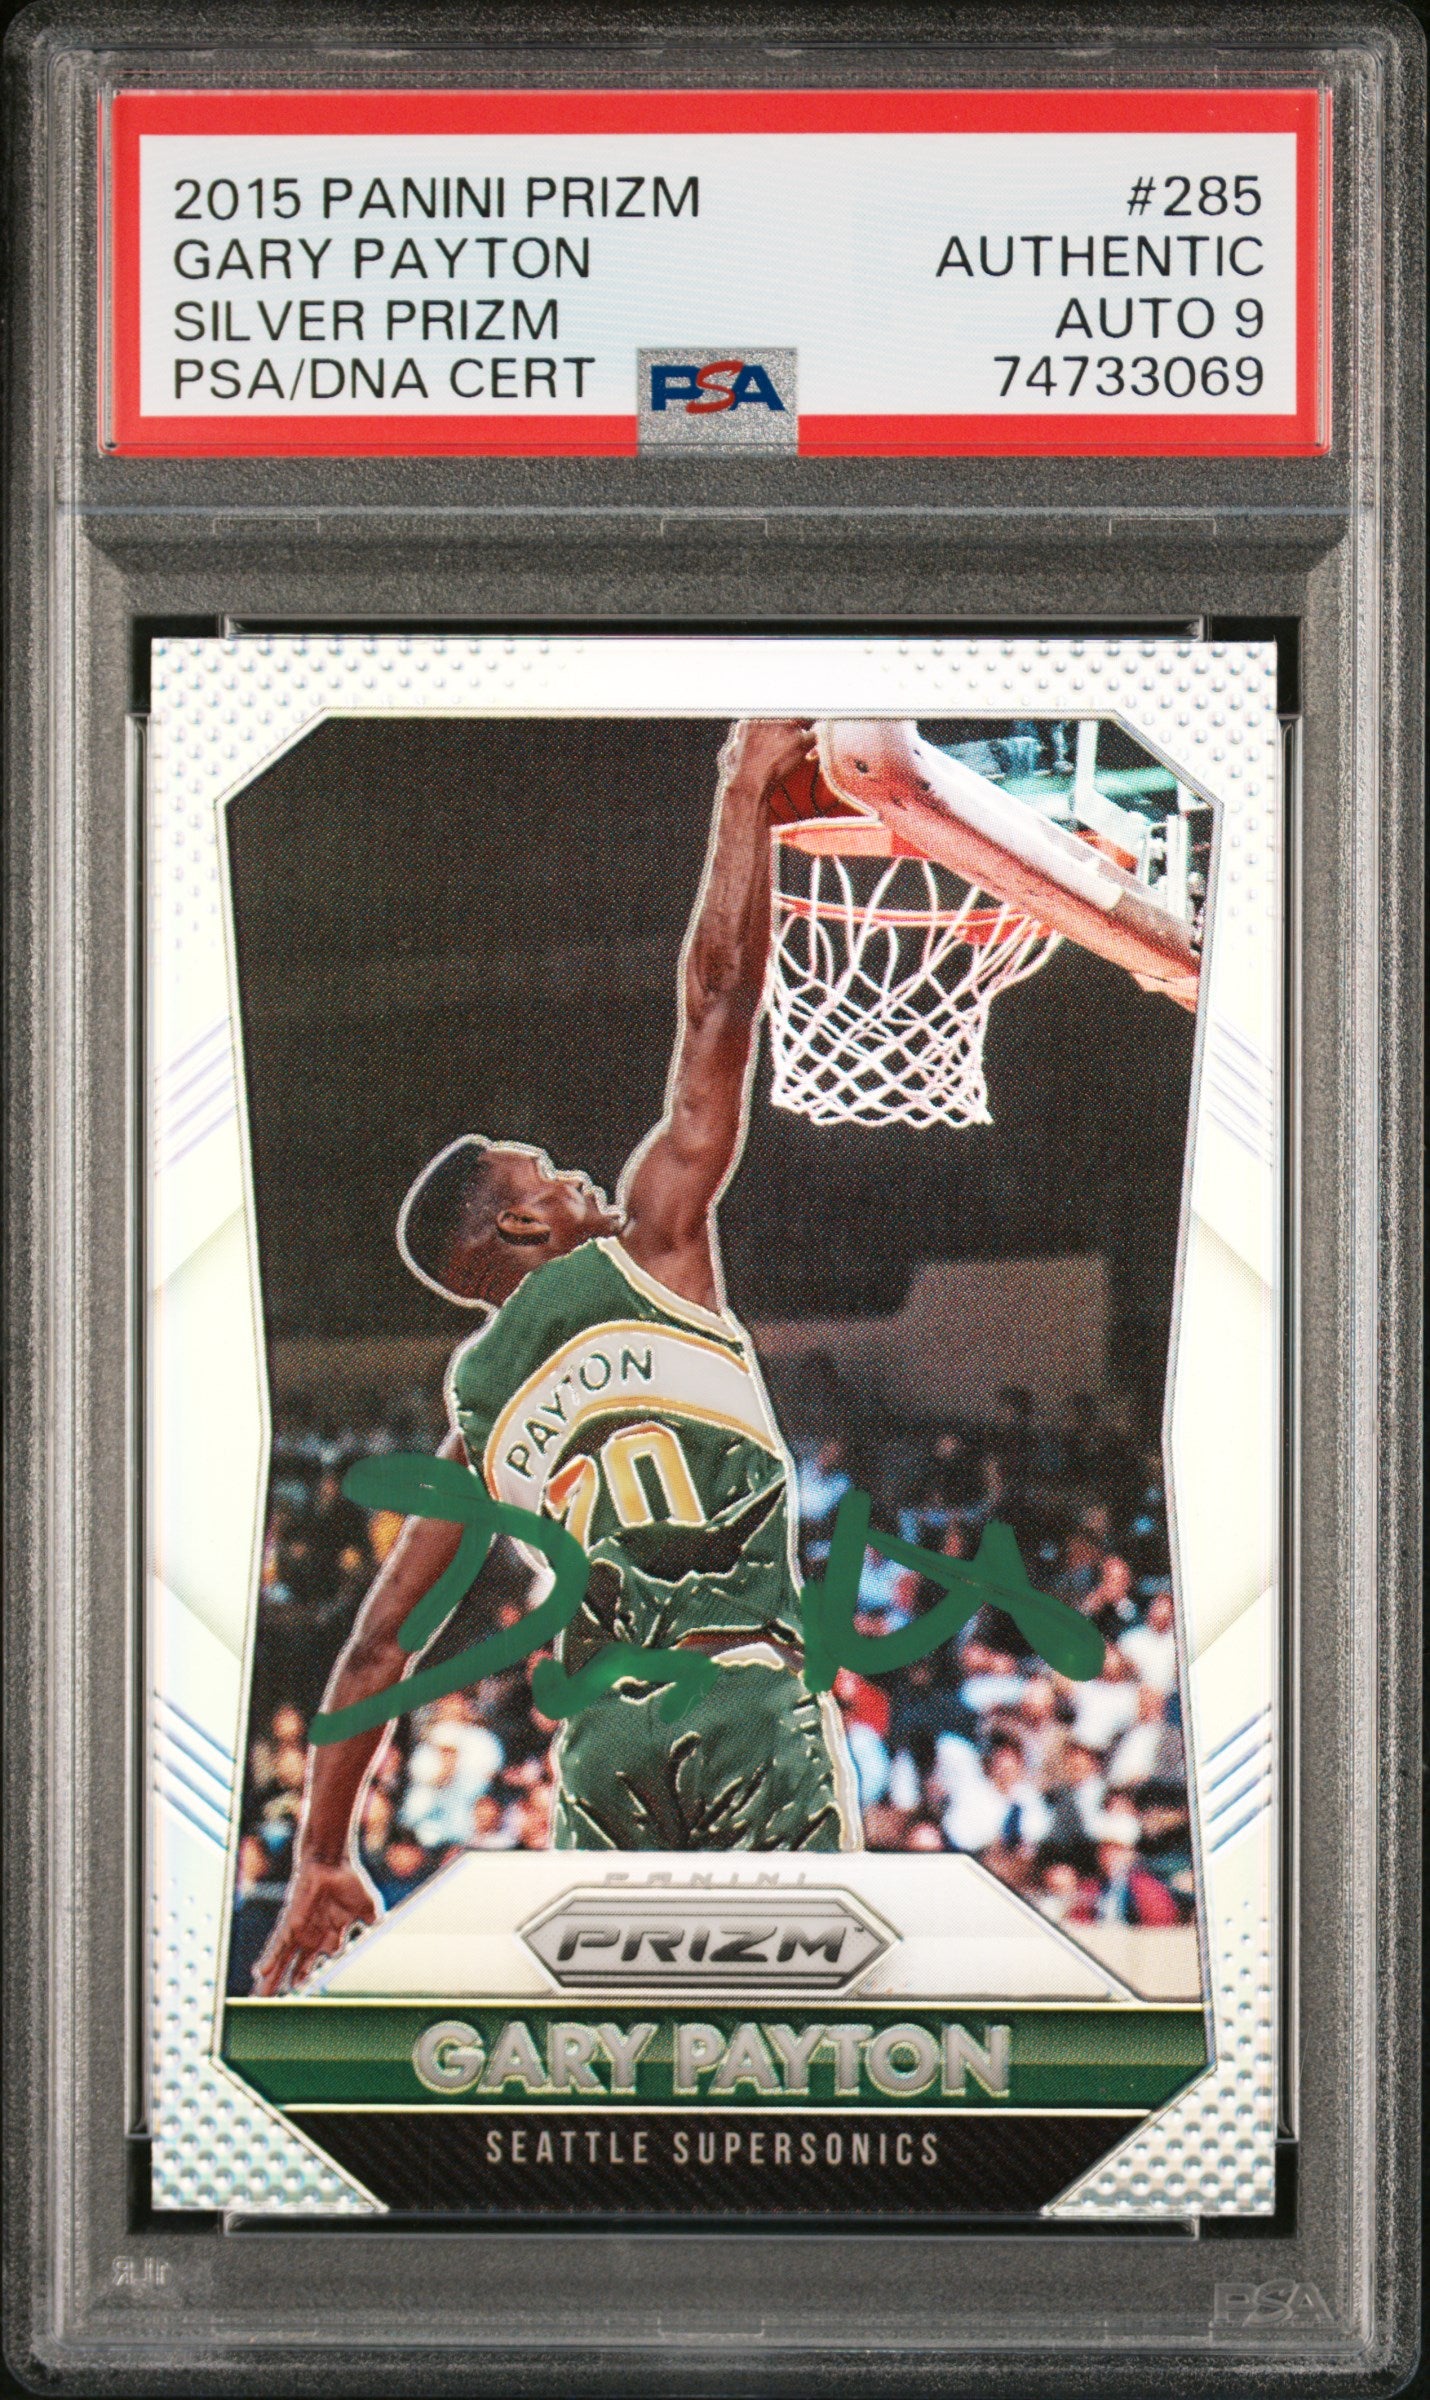 Graded Basketball Cards Page 6 - Powers Sports Memorabilia